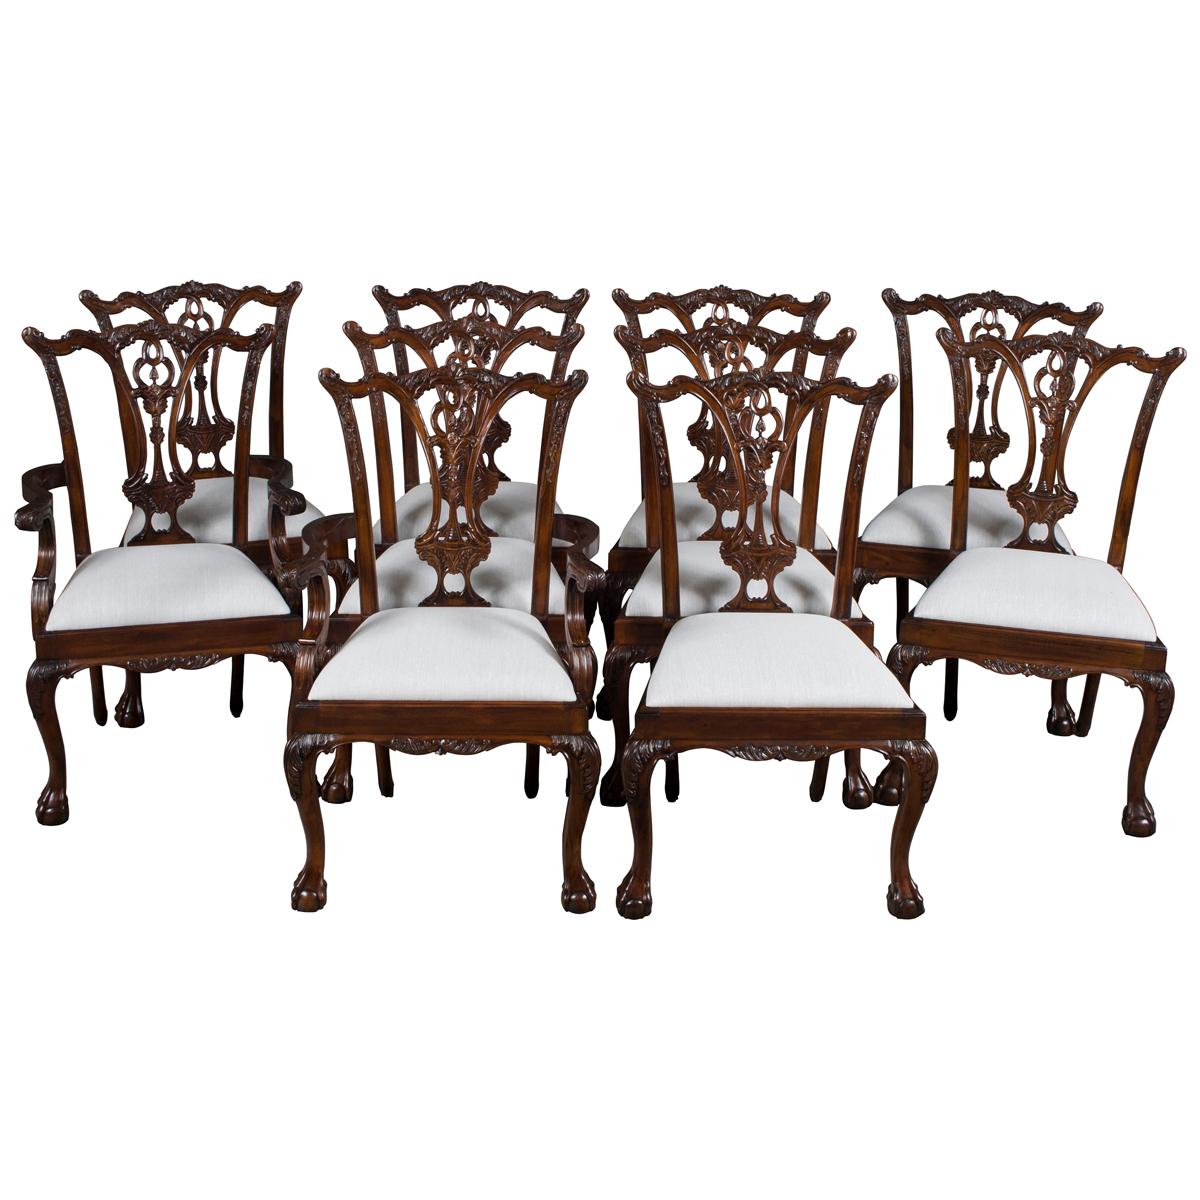 New Carved Solid Mahogany Ball and Claw Foot Set of Ten Dining Room Chairs For Sale